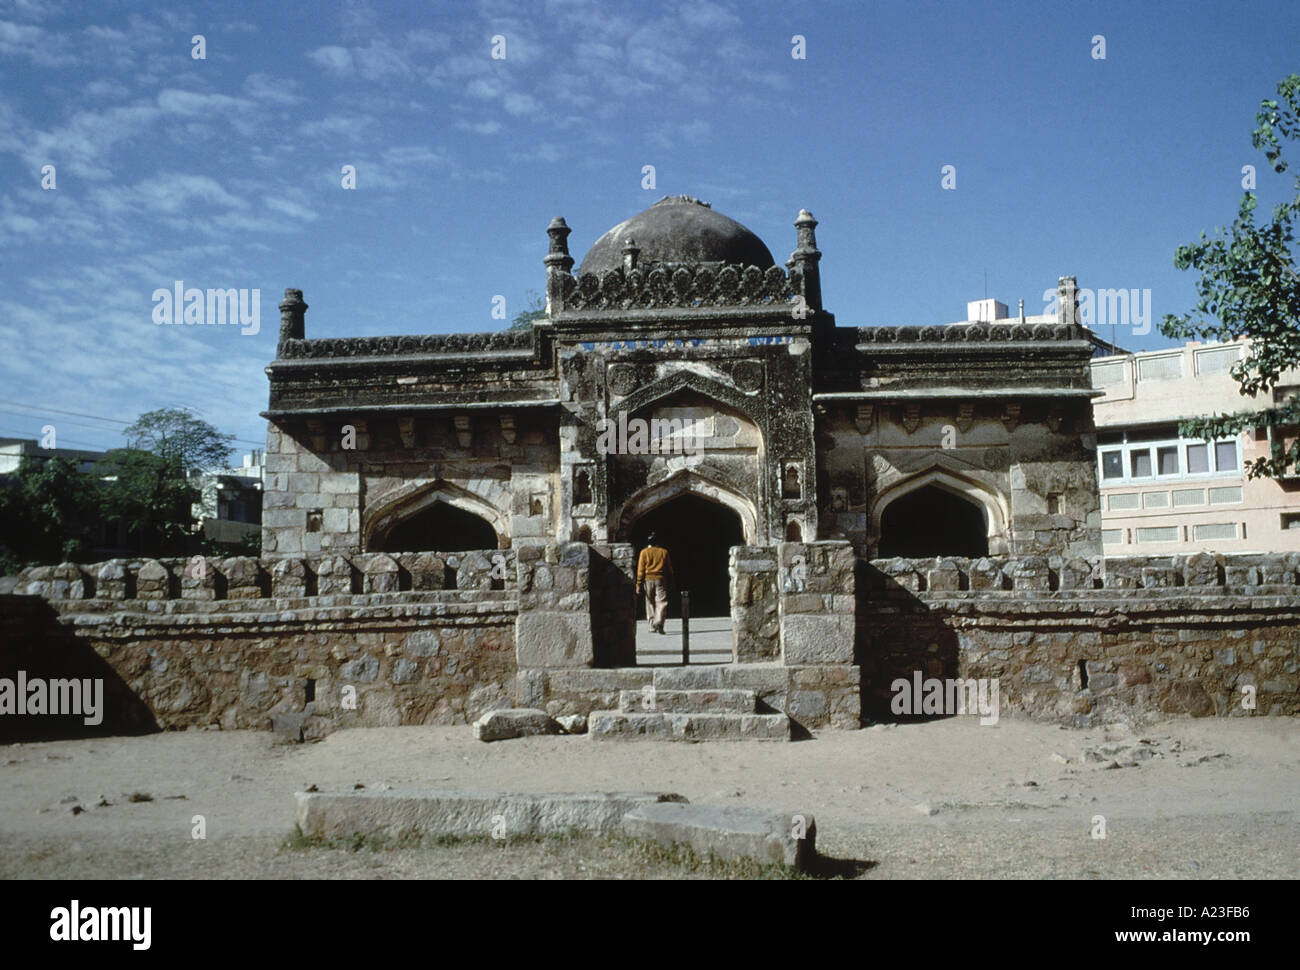 Nili Mosque. View from the east. Dated: Lodi period, 1505-56 A.D. Delhi, India. Stock Photo